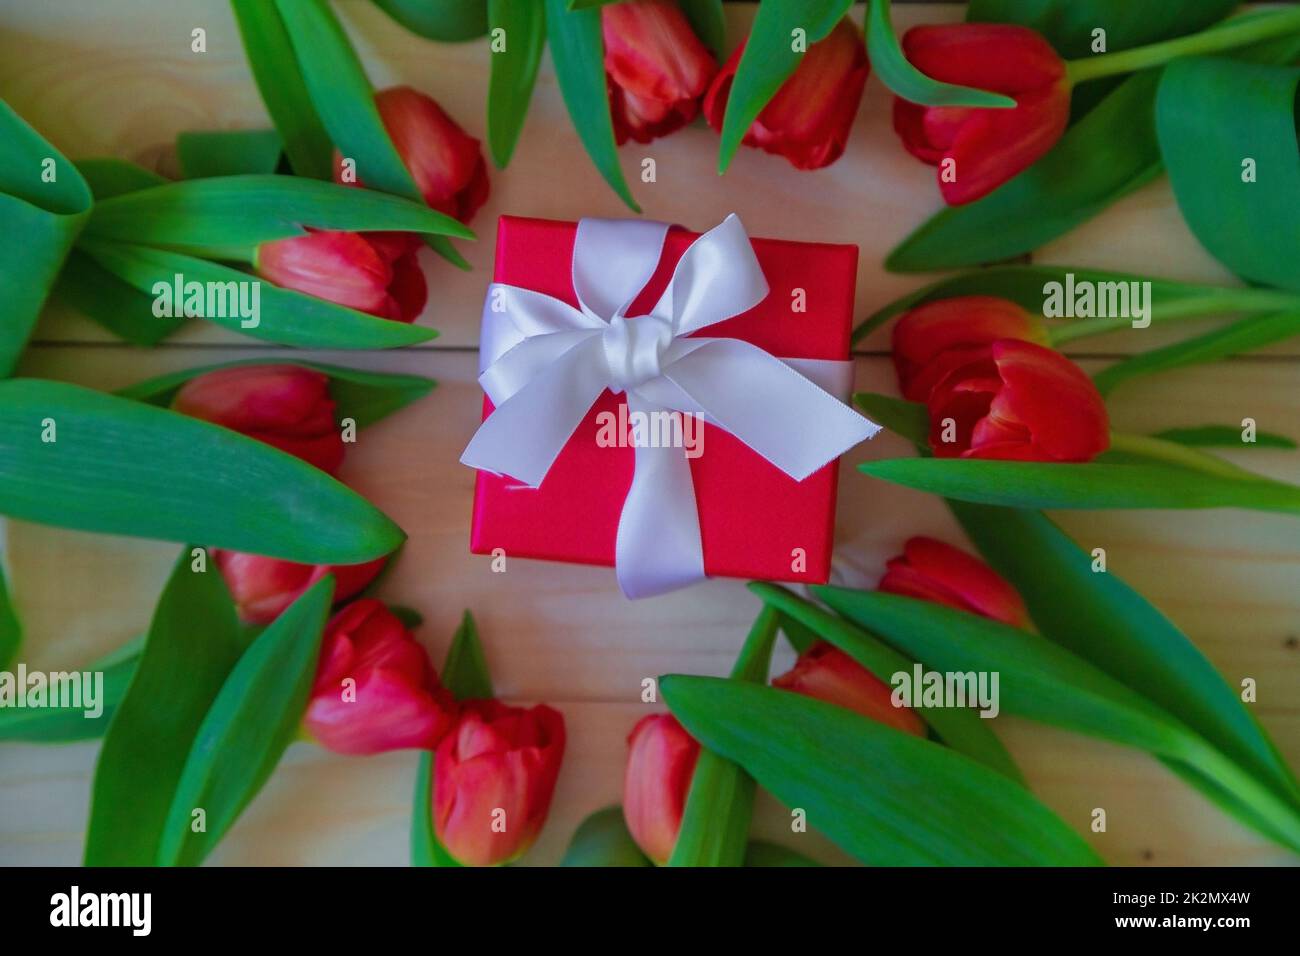 Pink tulips with green leaves lie in a circle on a wooden background, in the middle of Lesha's gift in a red package with a white bow Stock Photo